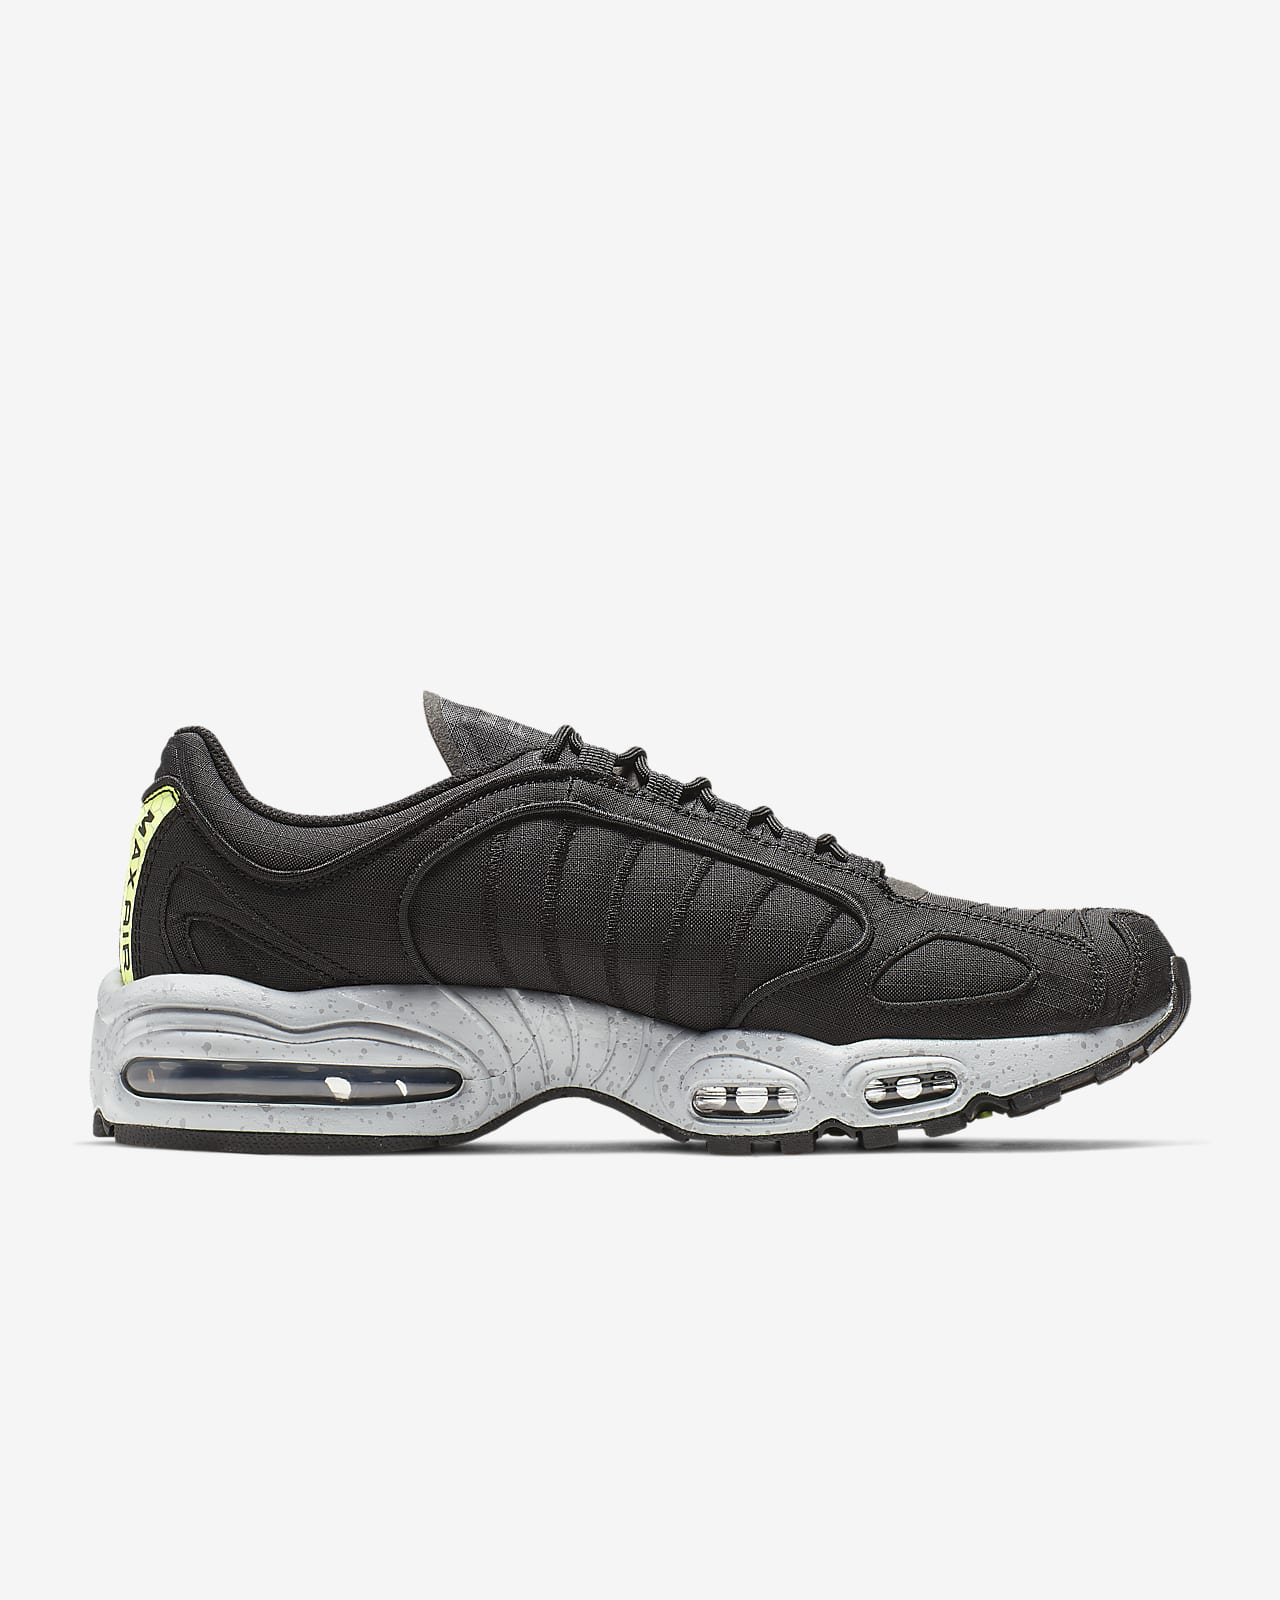 nike air max tailwind hombre